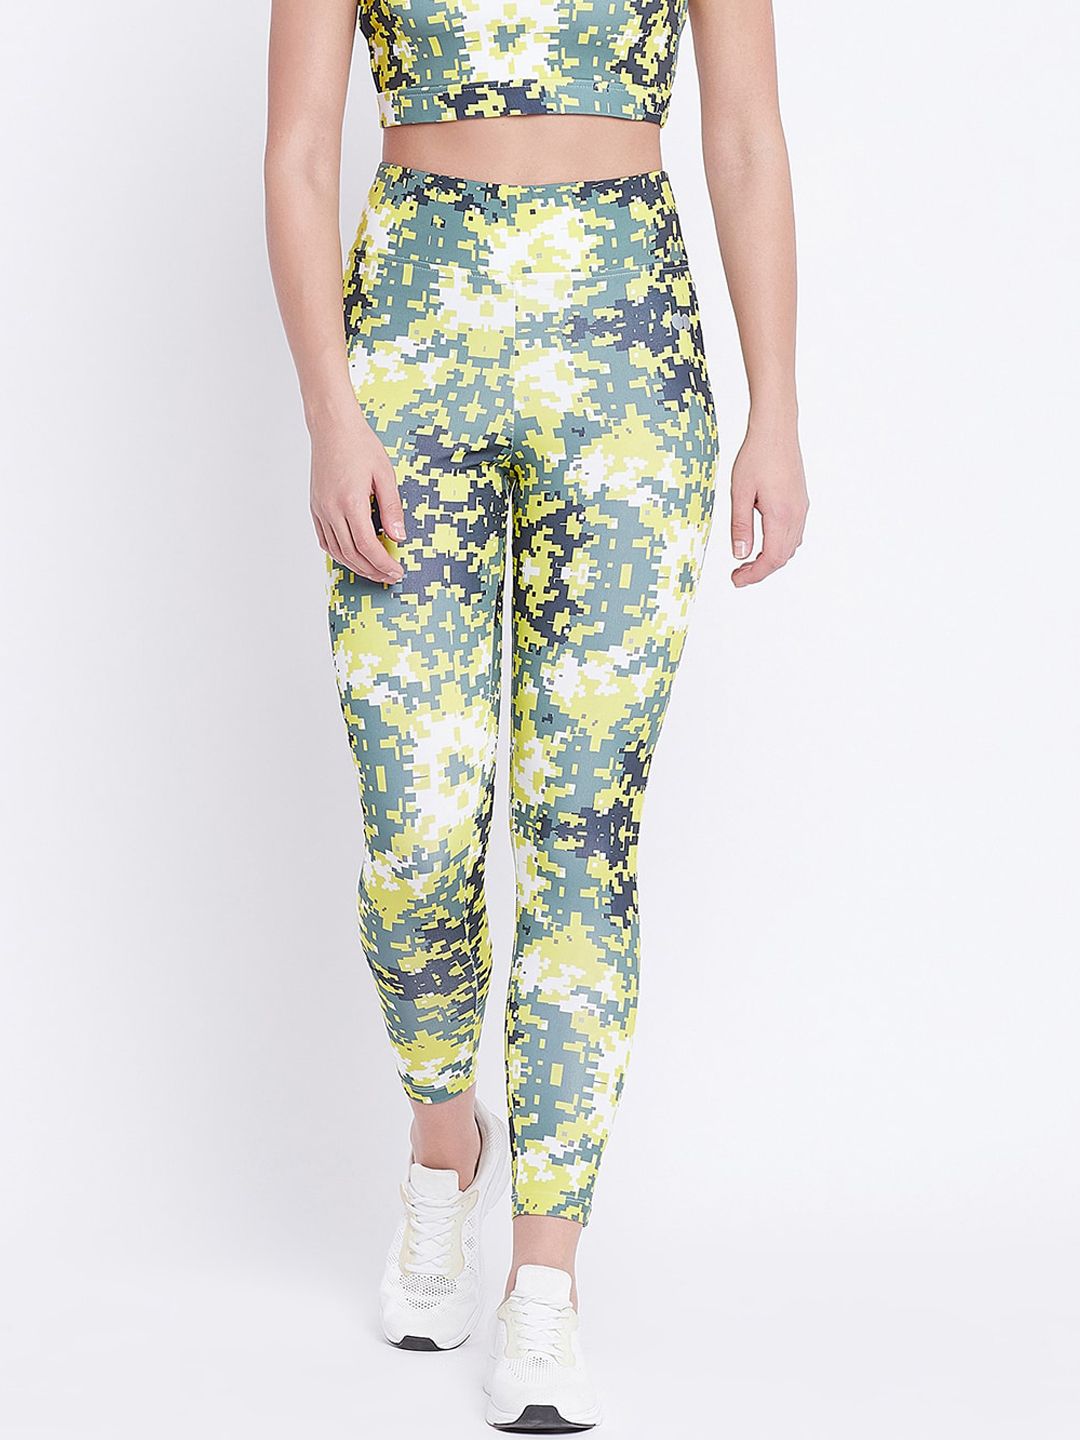 Clovia Women Grey & Yellow Printed Ankle-Length Tights Price in India